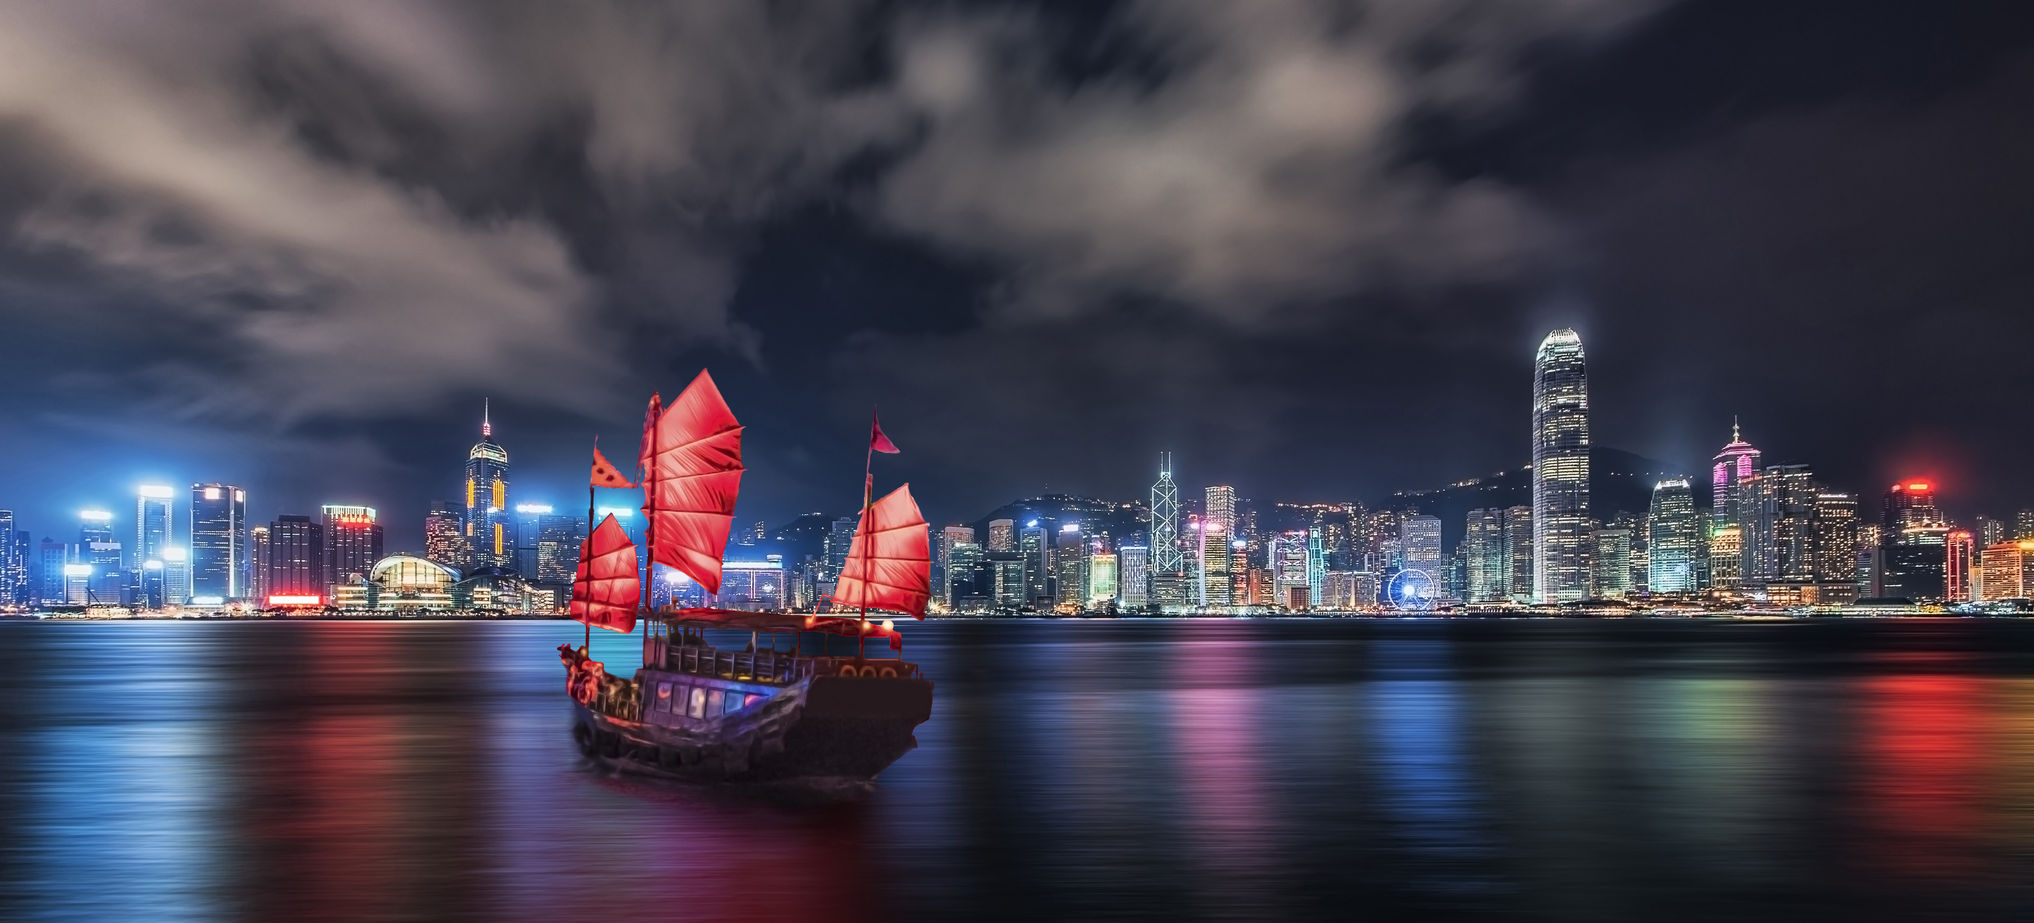 Offshore Structure With Online Operations In Hong Kong In The Digital Age – Walking A Thin Line?